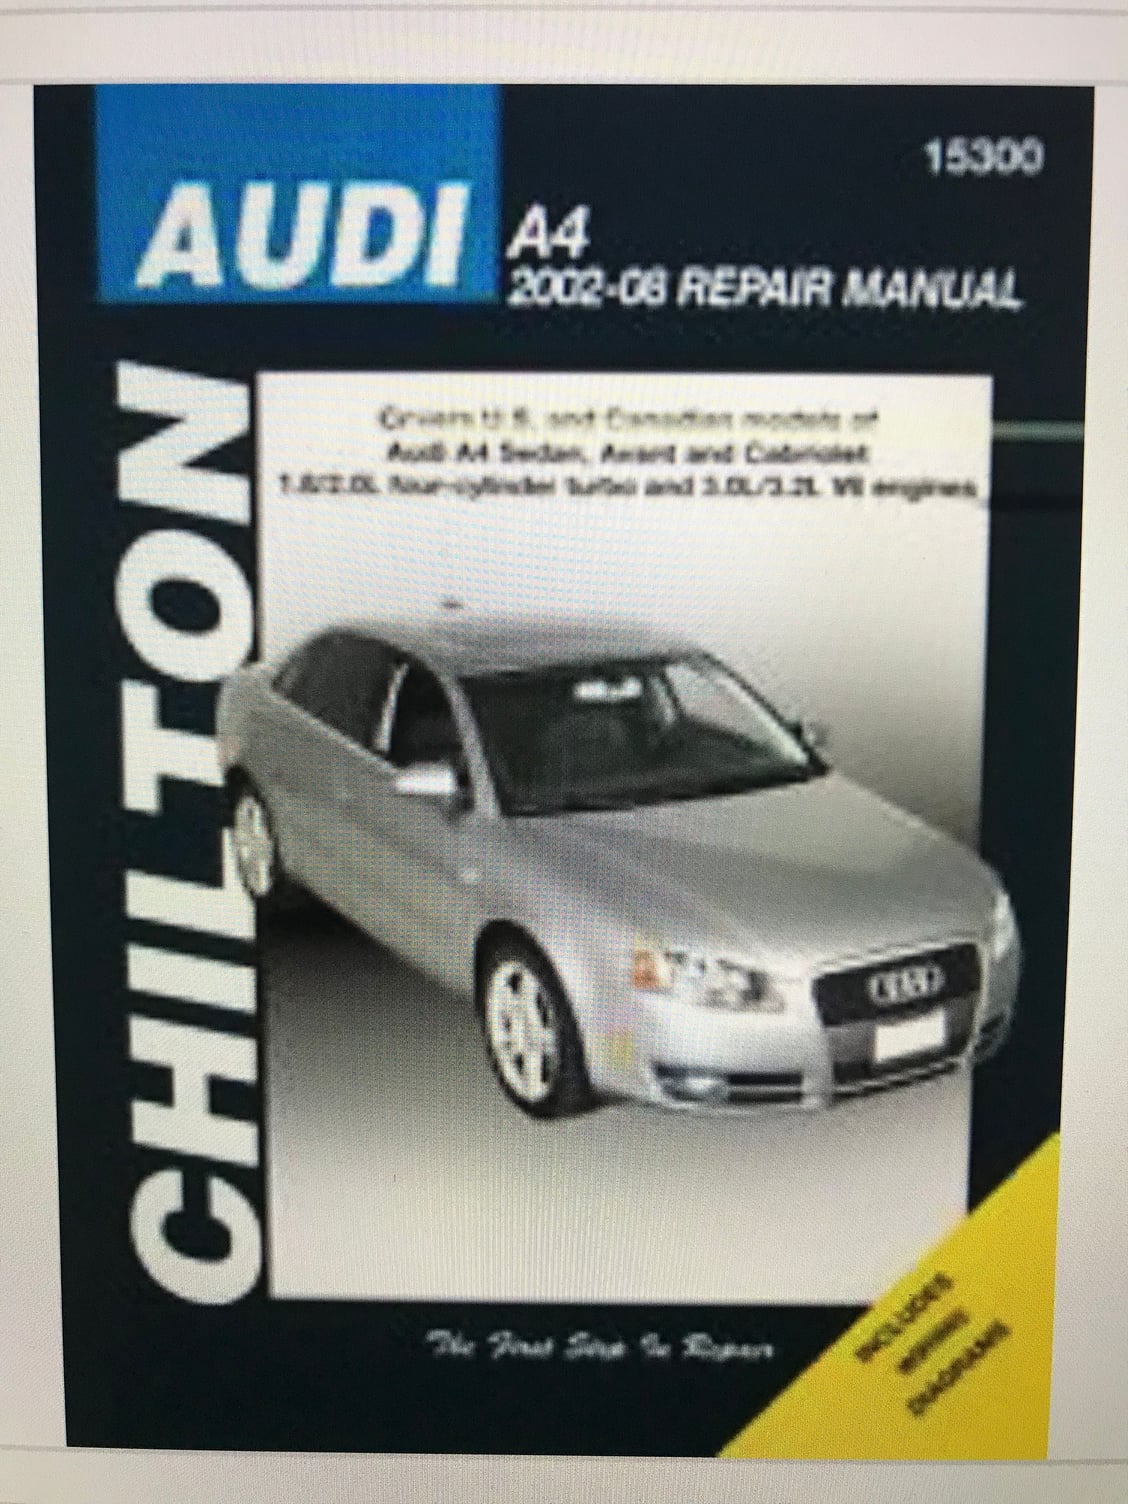 Manual Shop - Audi Forum - Audi Forums for the A4, S4, TT, A3, A6 and more!